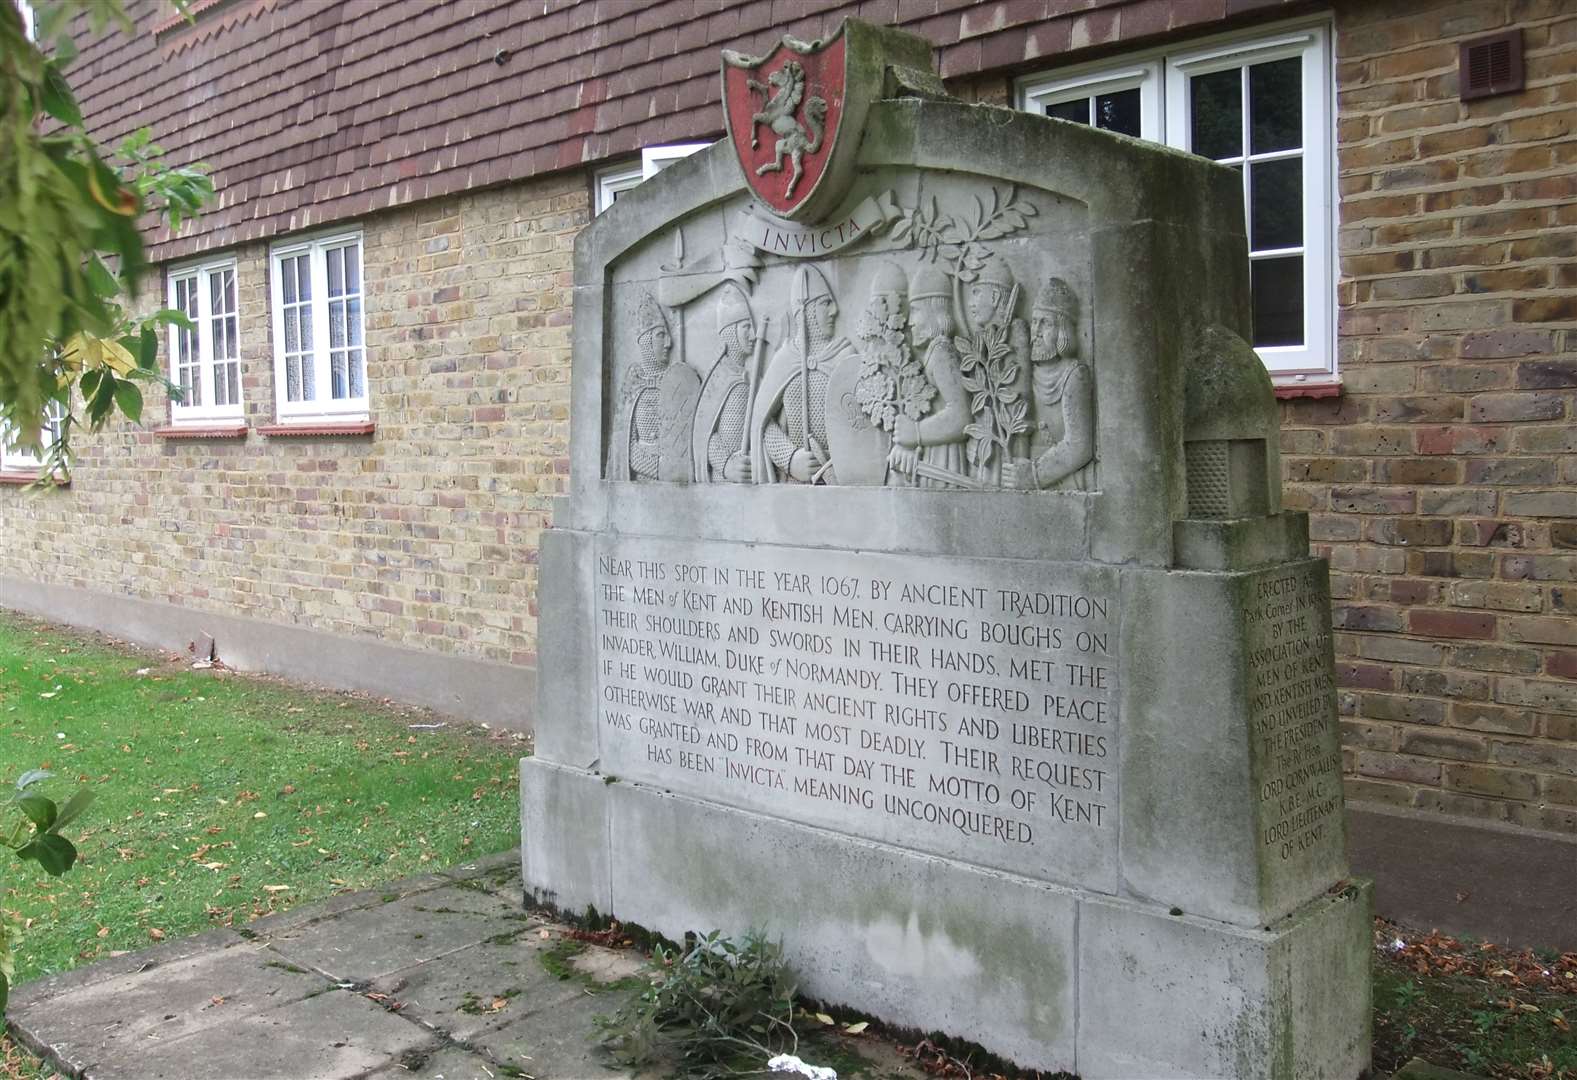 The plaque at the Church of St. Peter and St. Paul in Swanscombe